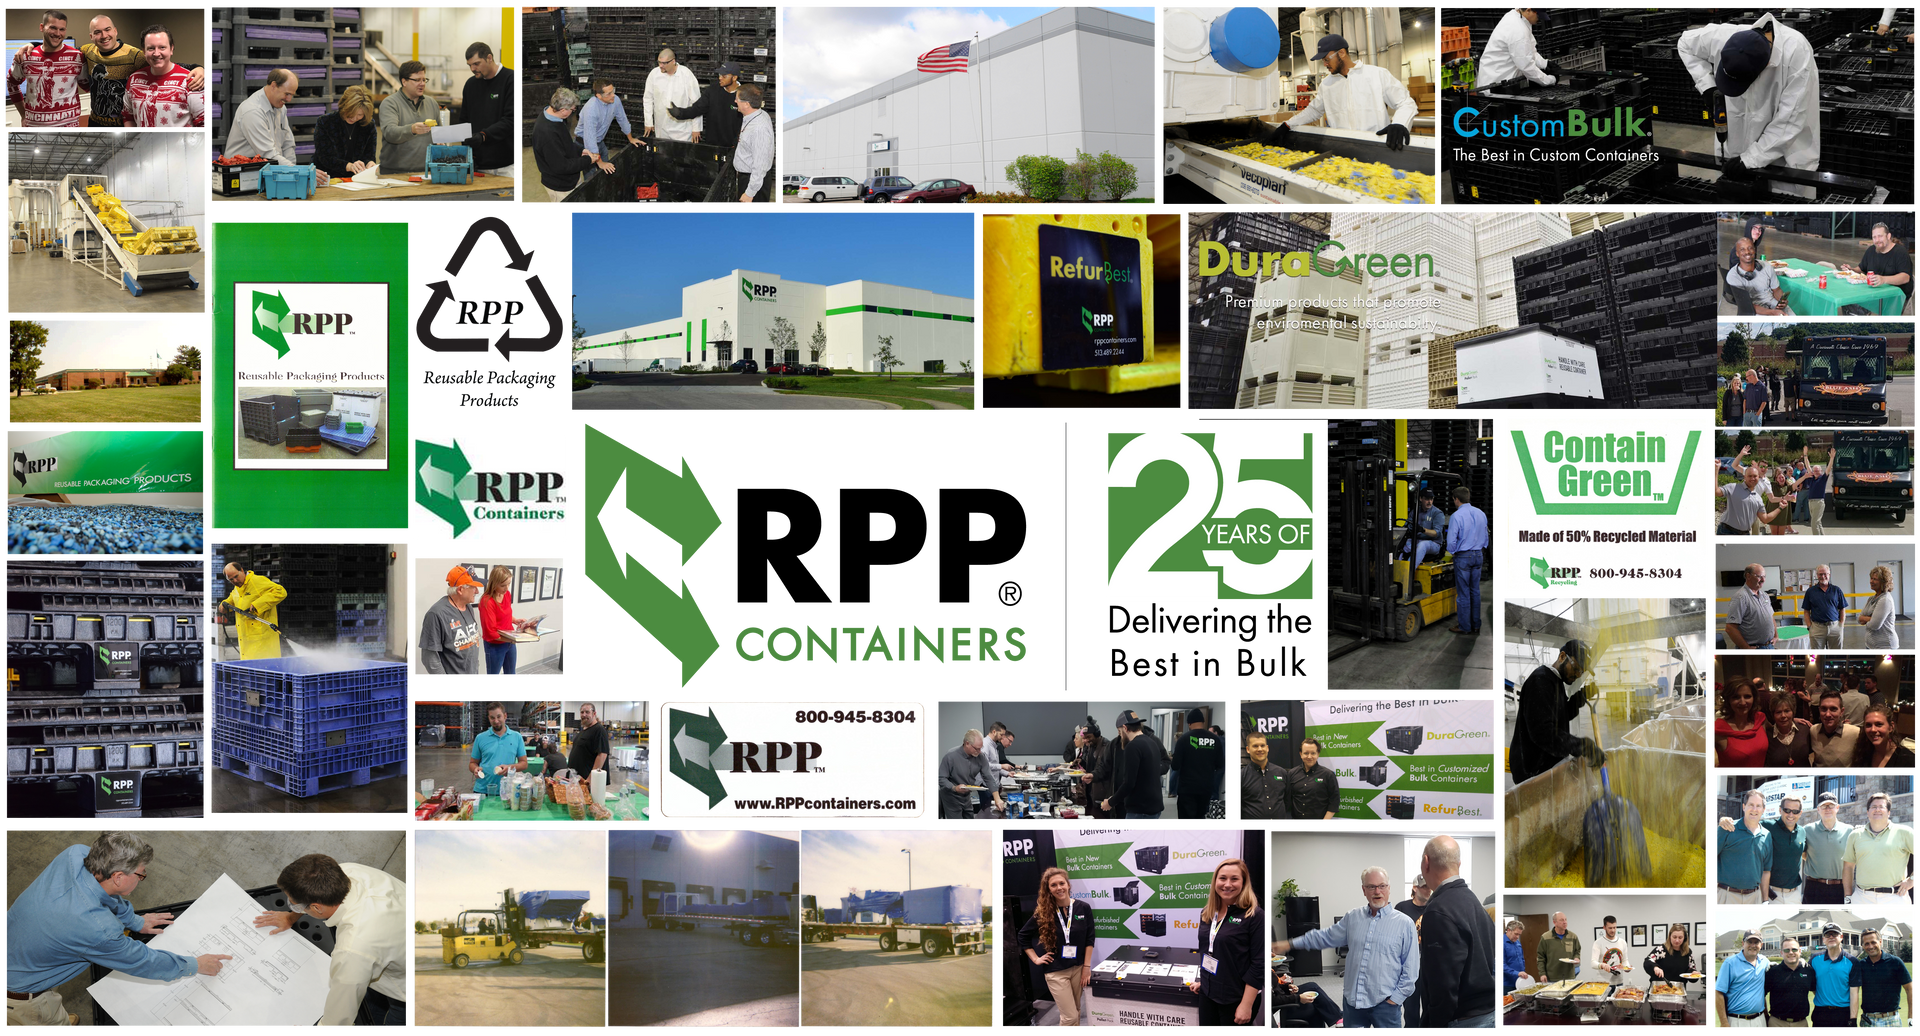 RPP Containers 25 Years of Delivering the Best in Bulk